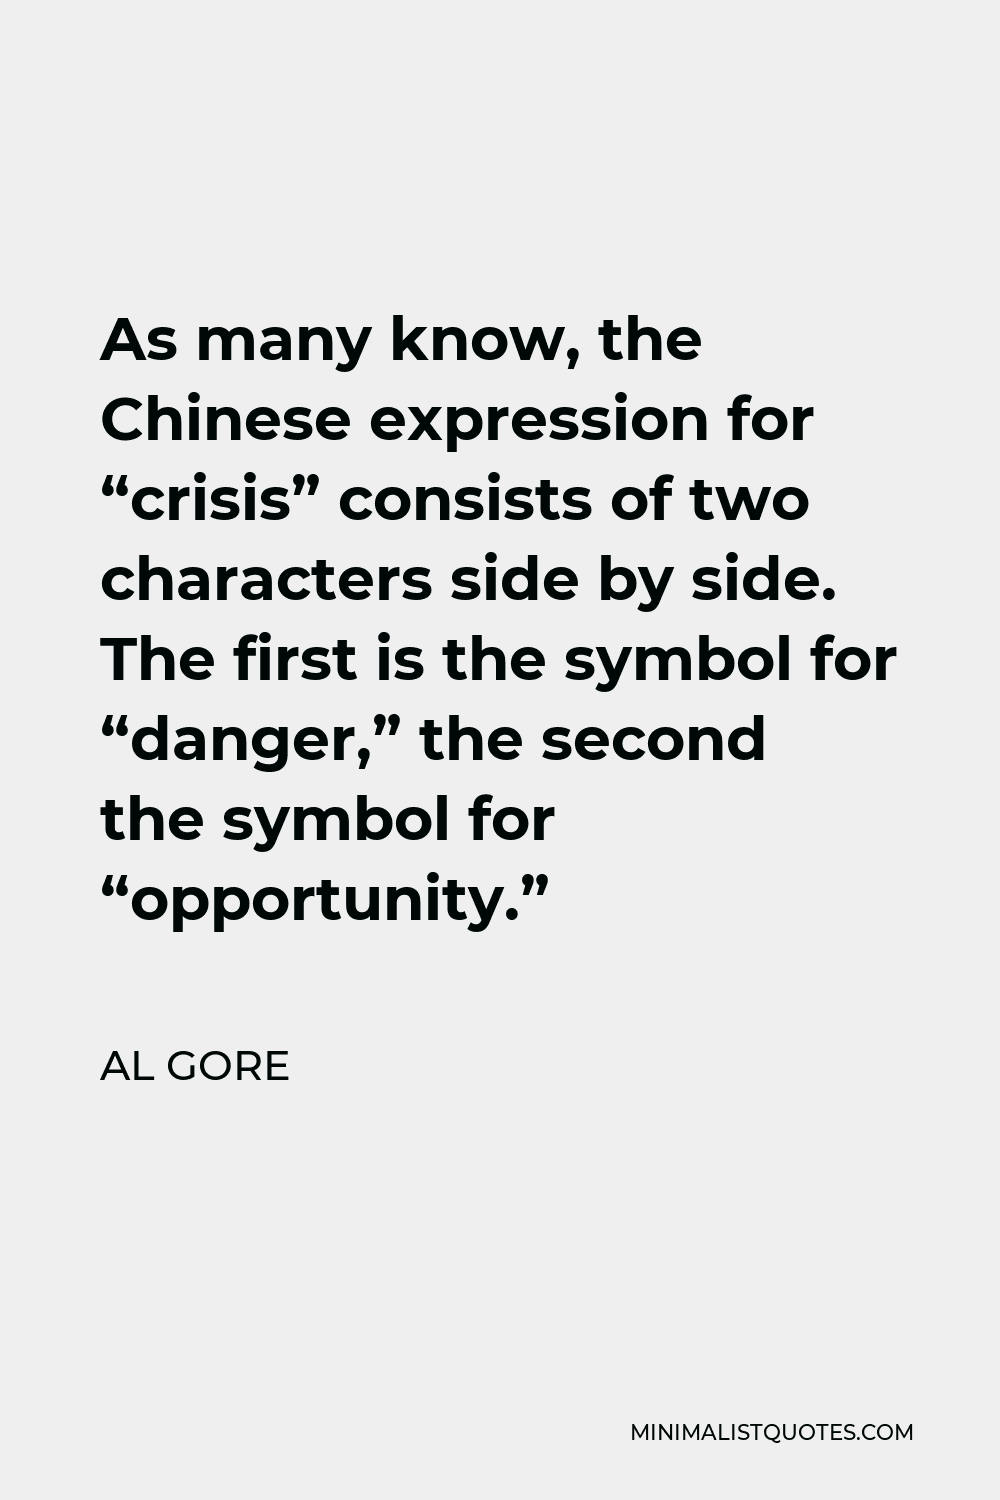 Al Gore Quote - As many know, the Chinese expression for “crisis” consists of two characters side by side. The first is the symbol for “danger,” the second the symbol for “opportunity.”